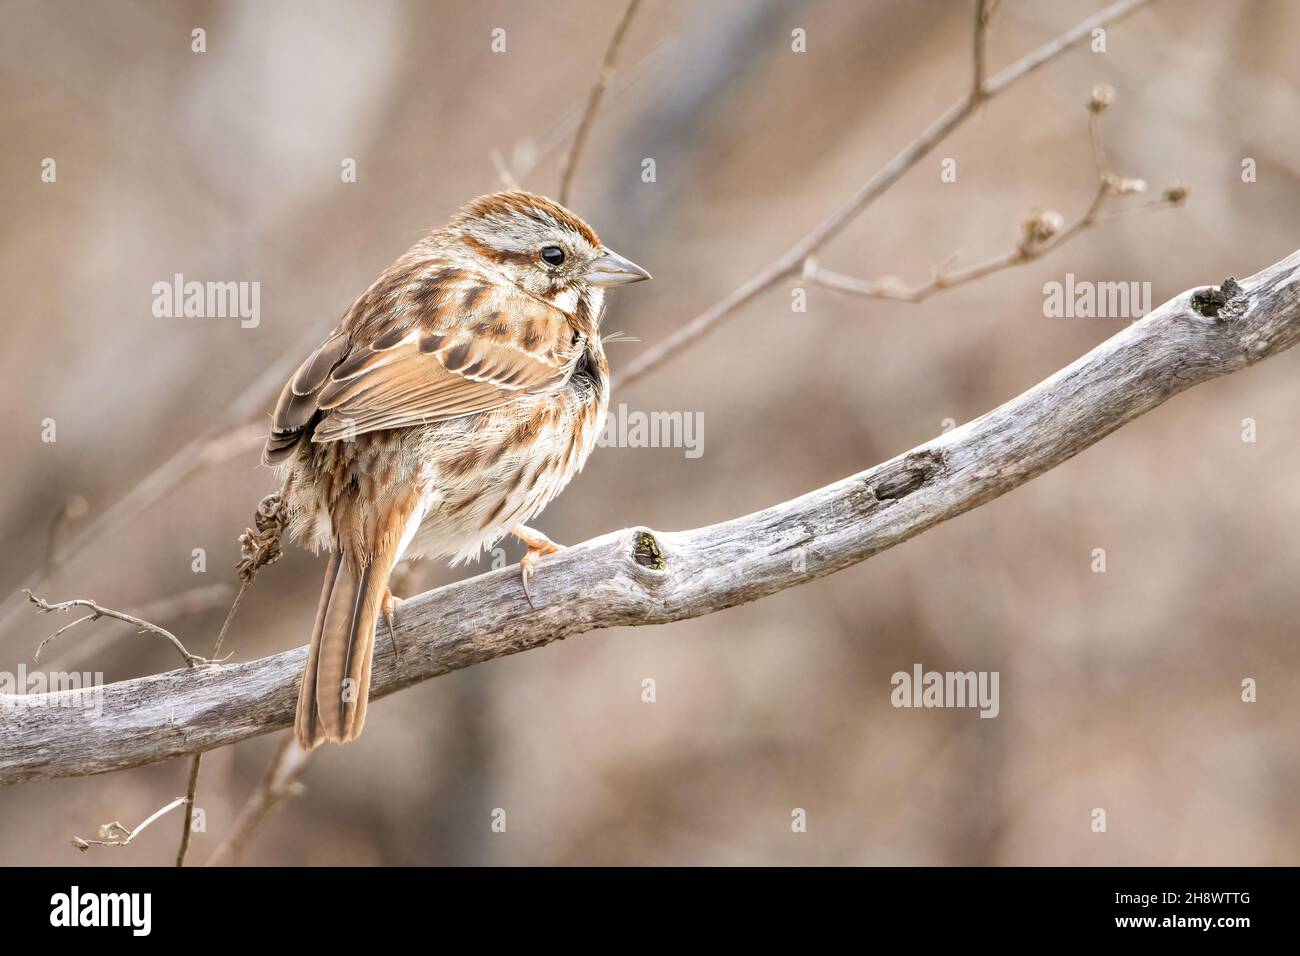 Small american sparrow perched on a tree branch early morning Stock Photo